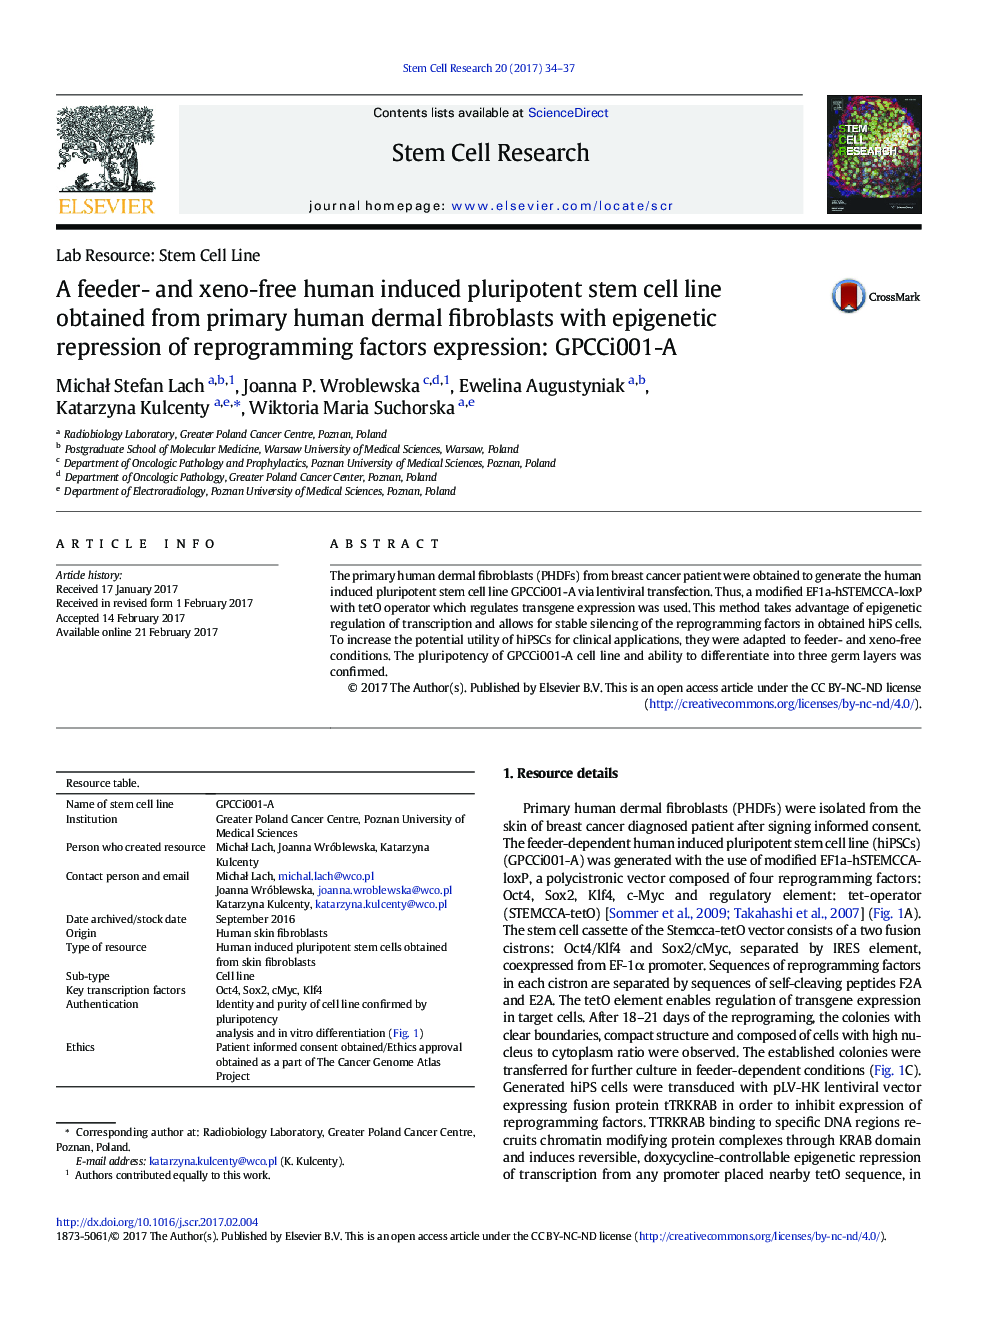 A feeder- and xeno-free human induced pluripotent stem cell line obtained from primary human dermal fibroblasts with epigenetic repression of reprogramming factors expression: GPCCi001-A